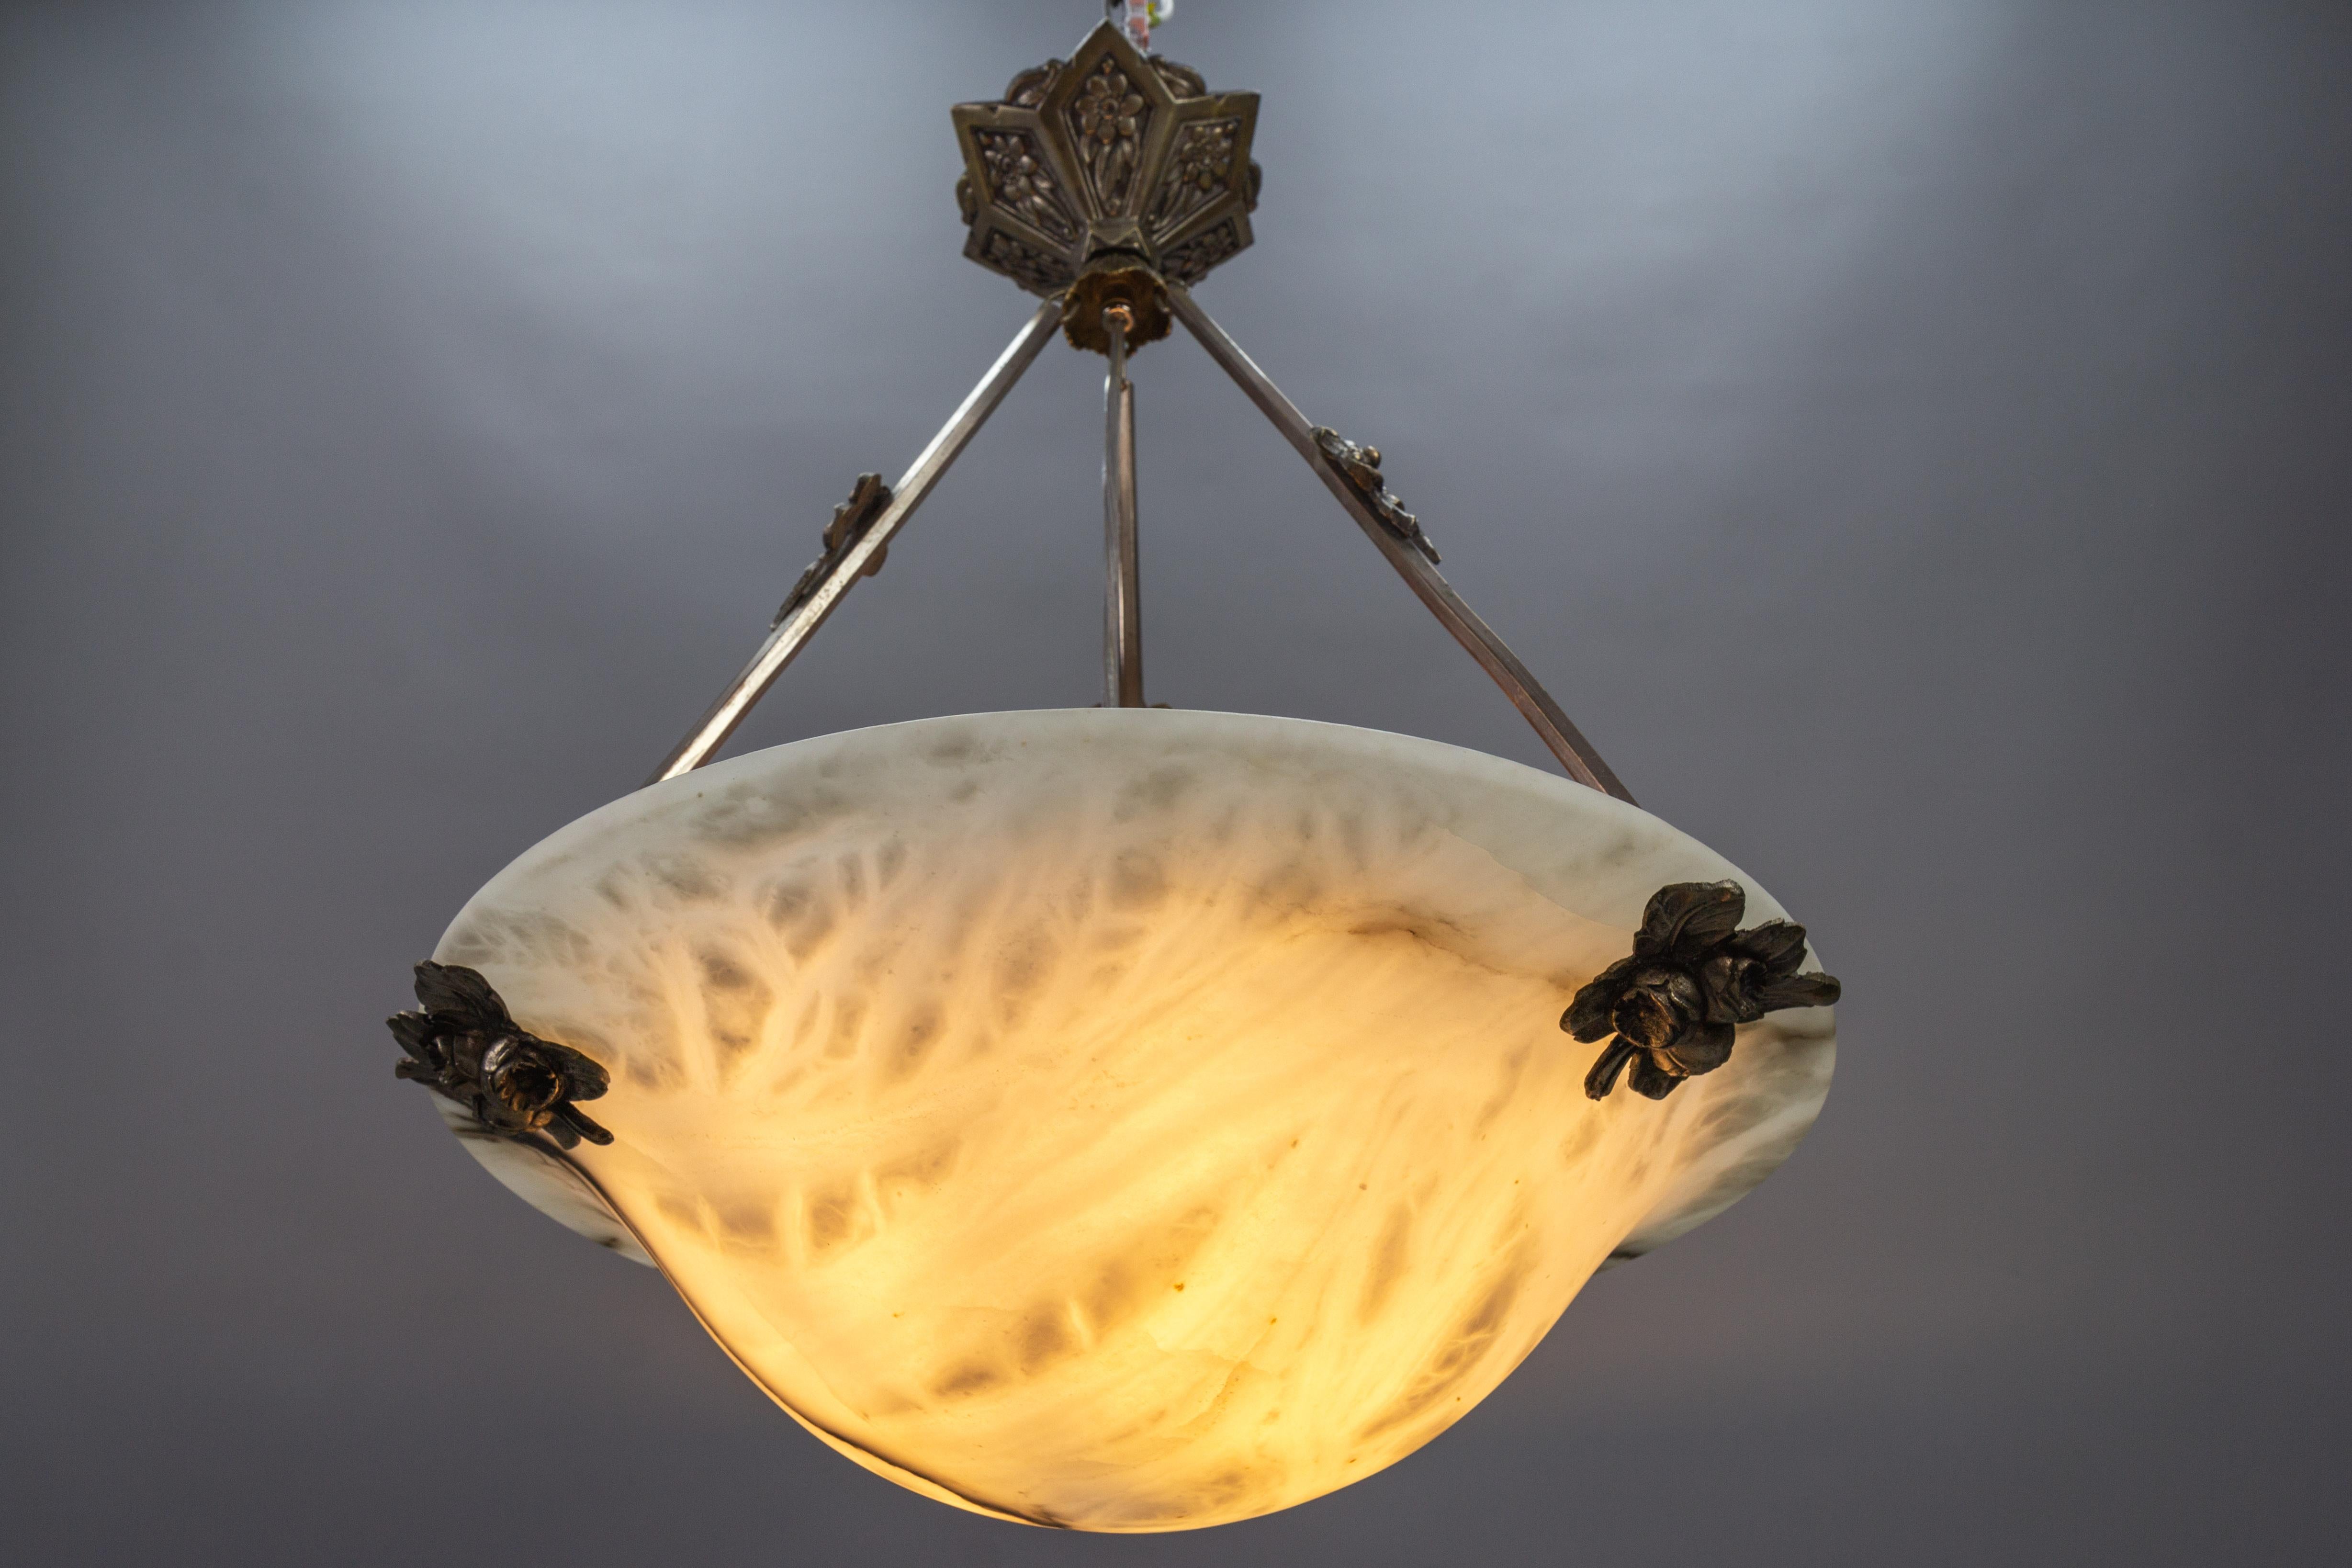 French Art Deco White and Black Veined Alabaster Pendant Light Fixture, ca. 1920 For Sale 10